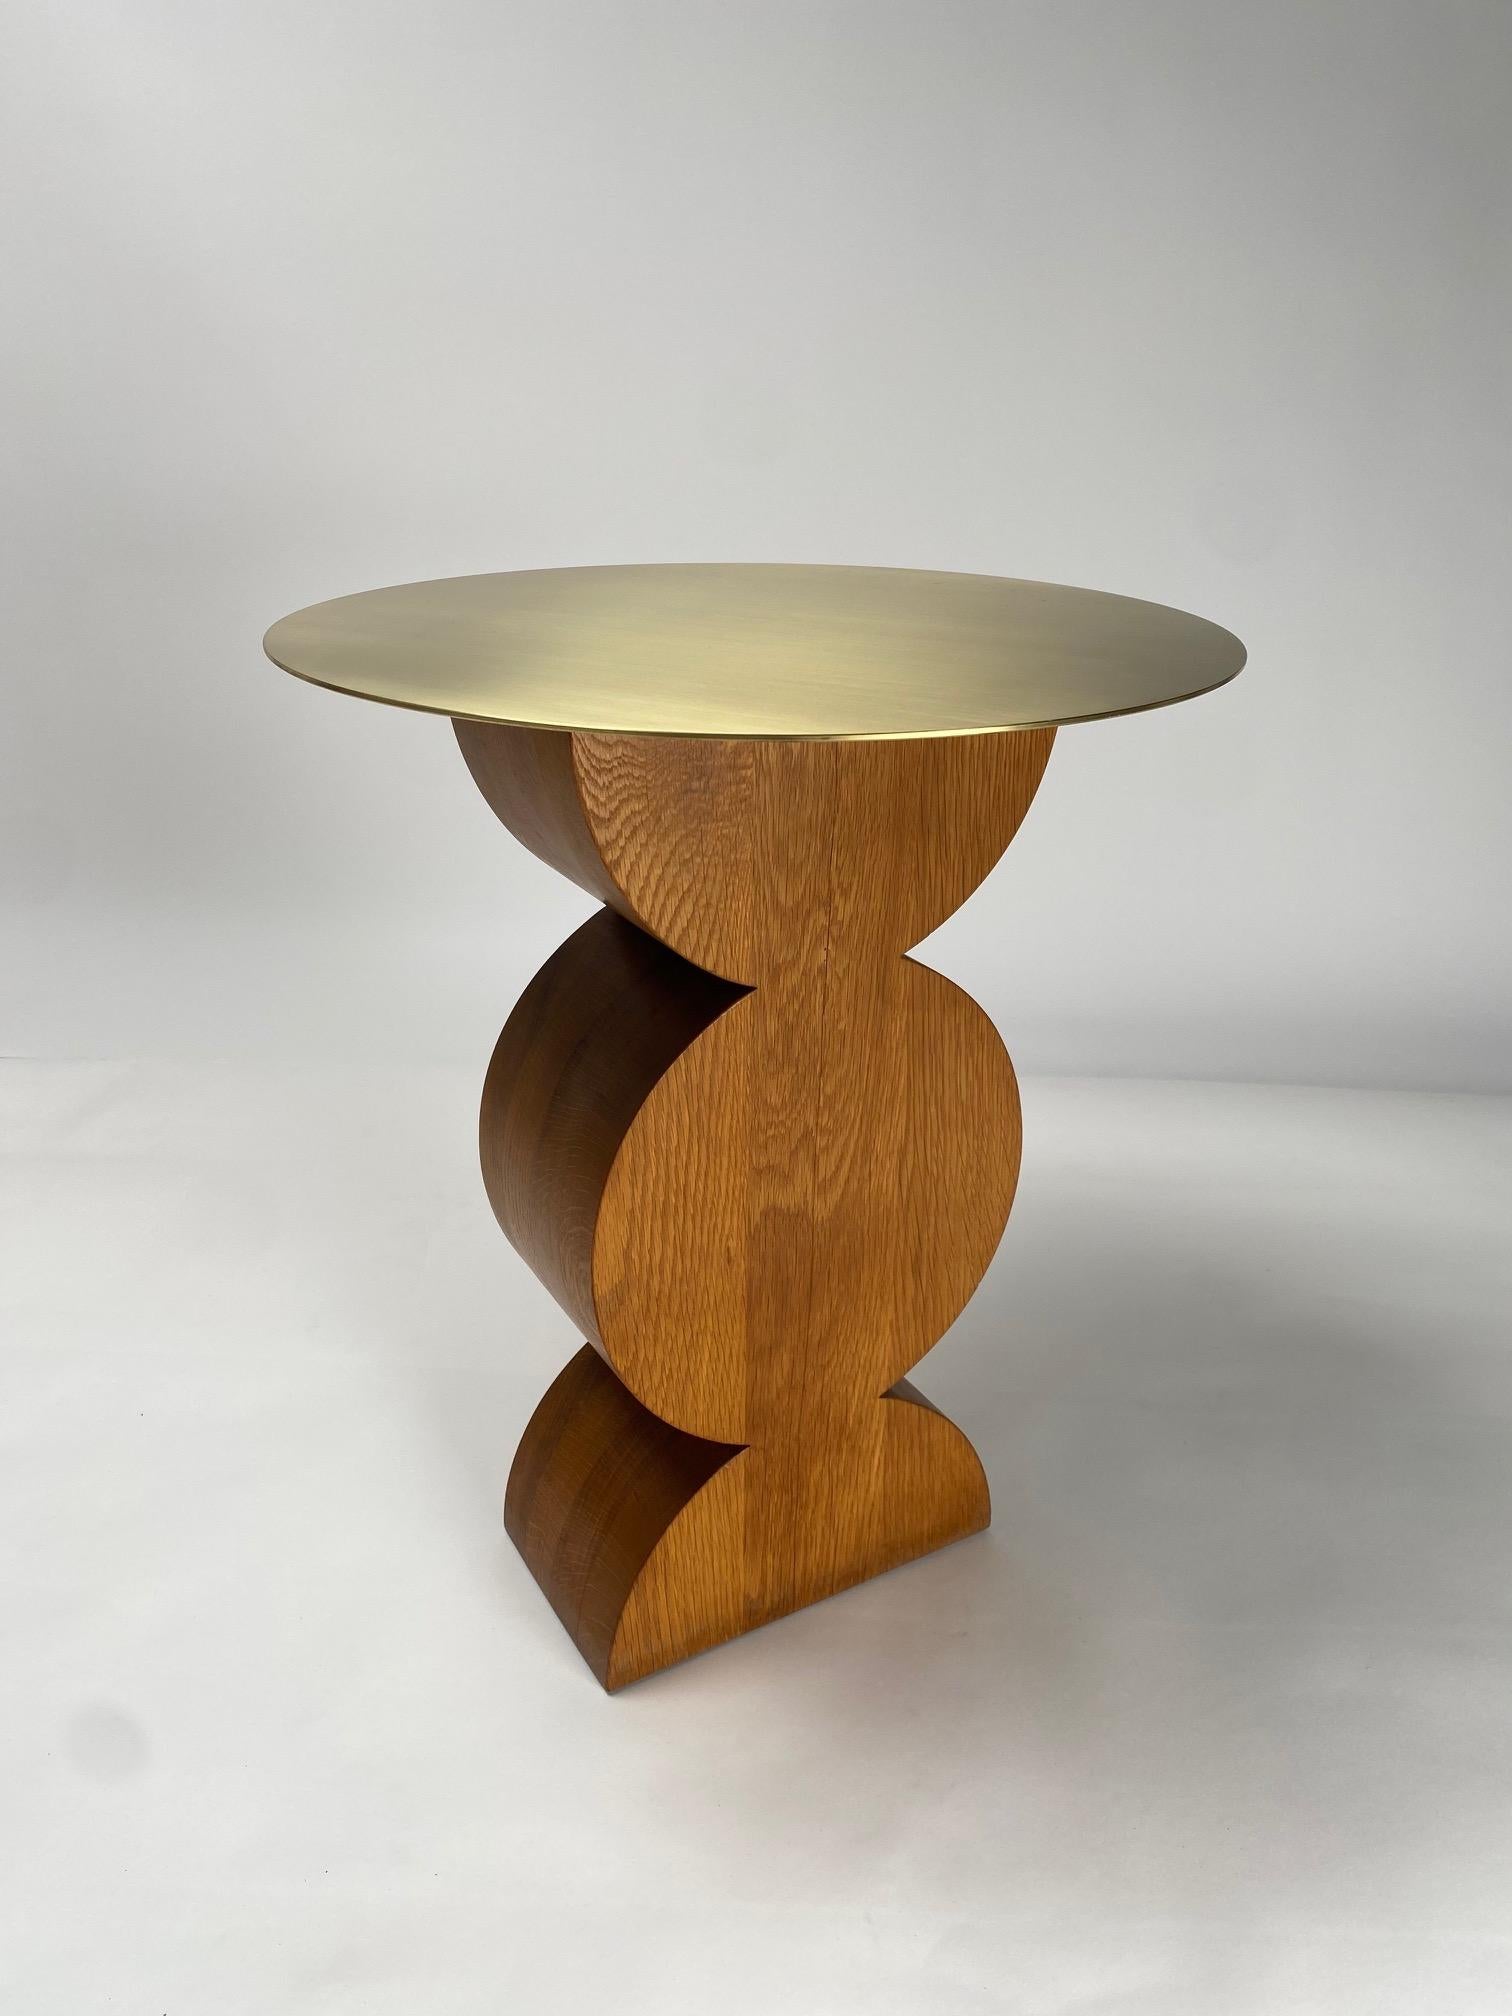 Constantin Side Table, Homage to Brancusi by Gavina, Italy, 1971. (First Edition)

The Constantin designer coffee table is a work of art included in the Ultramobile collection designed in 1971 by Studio Simon as a tribute to the work of the artist